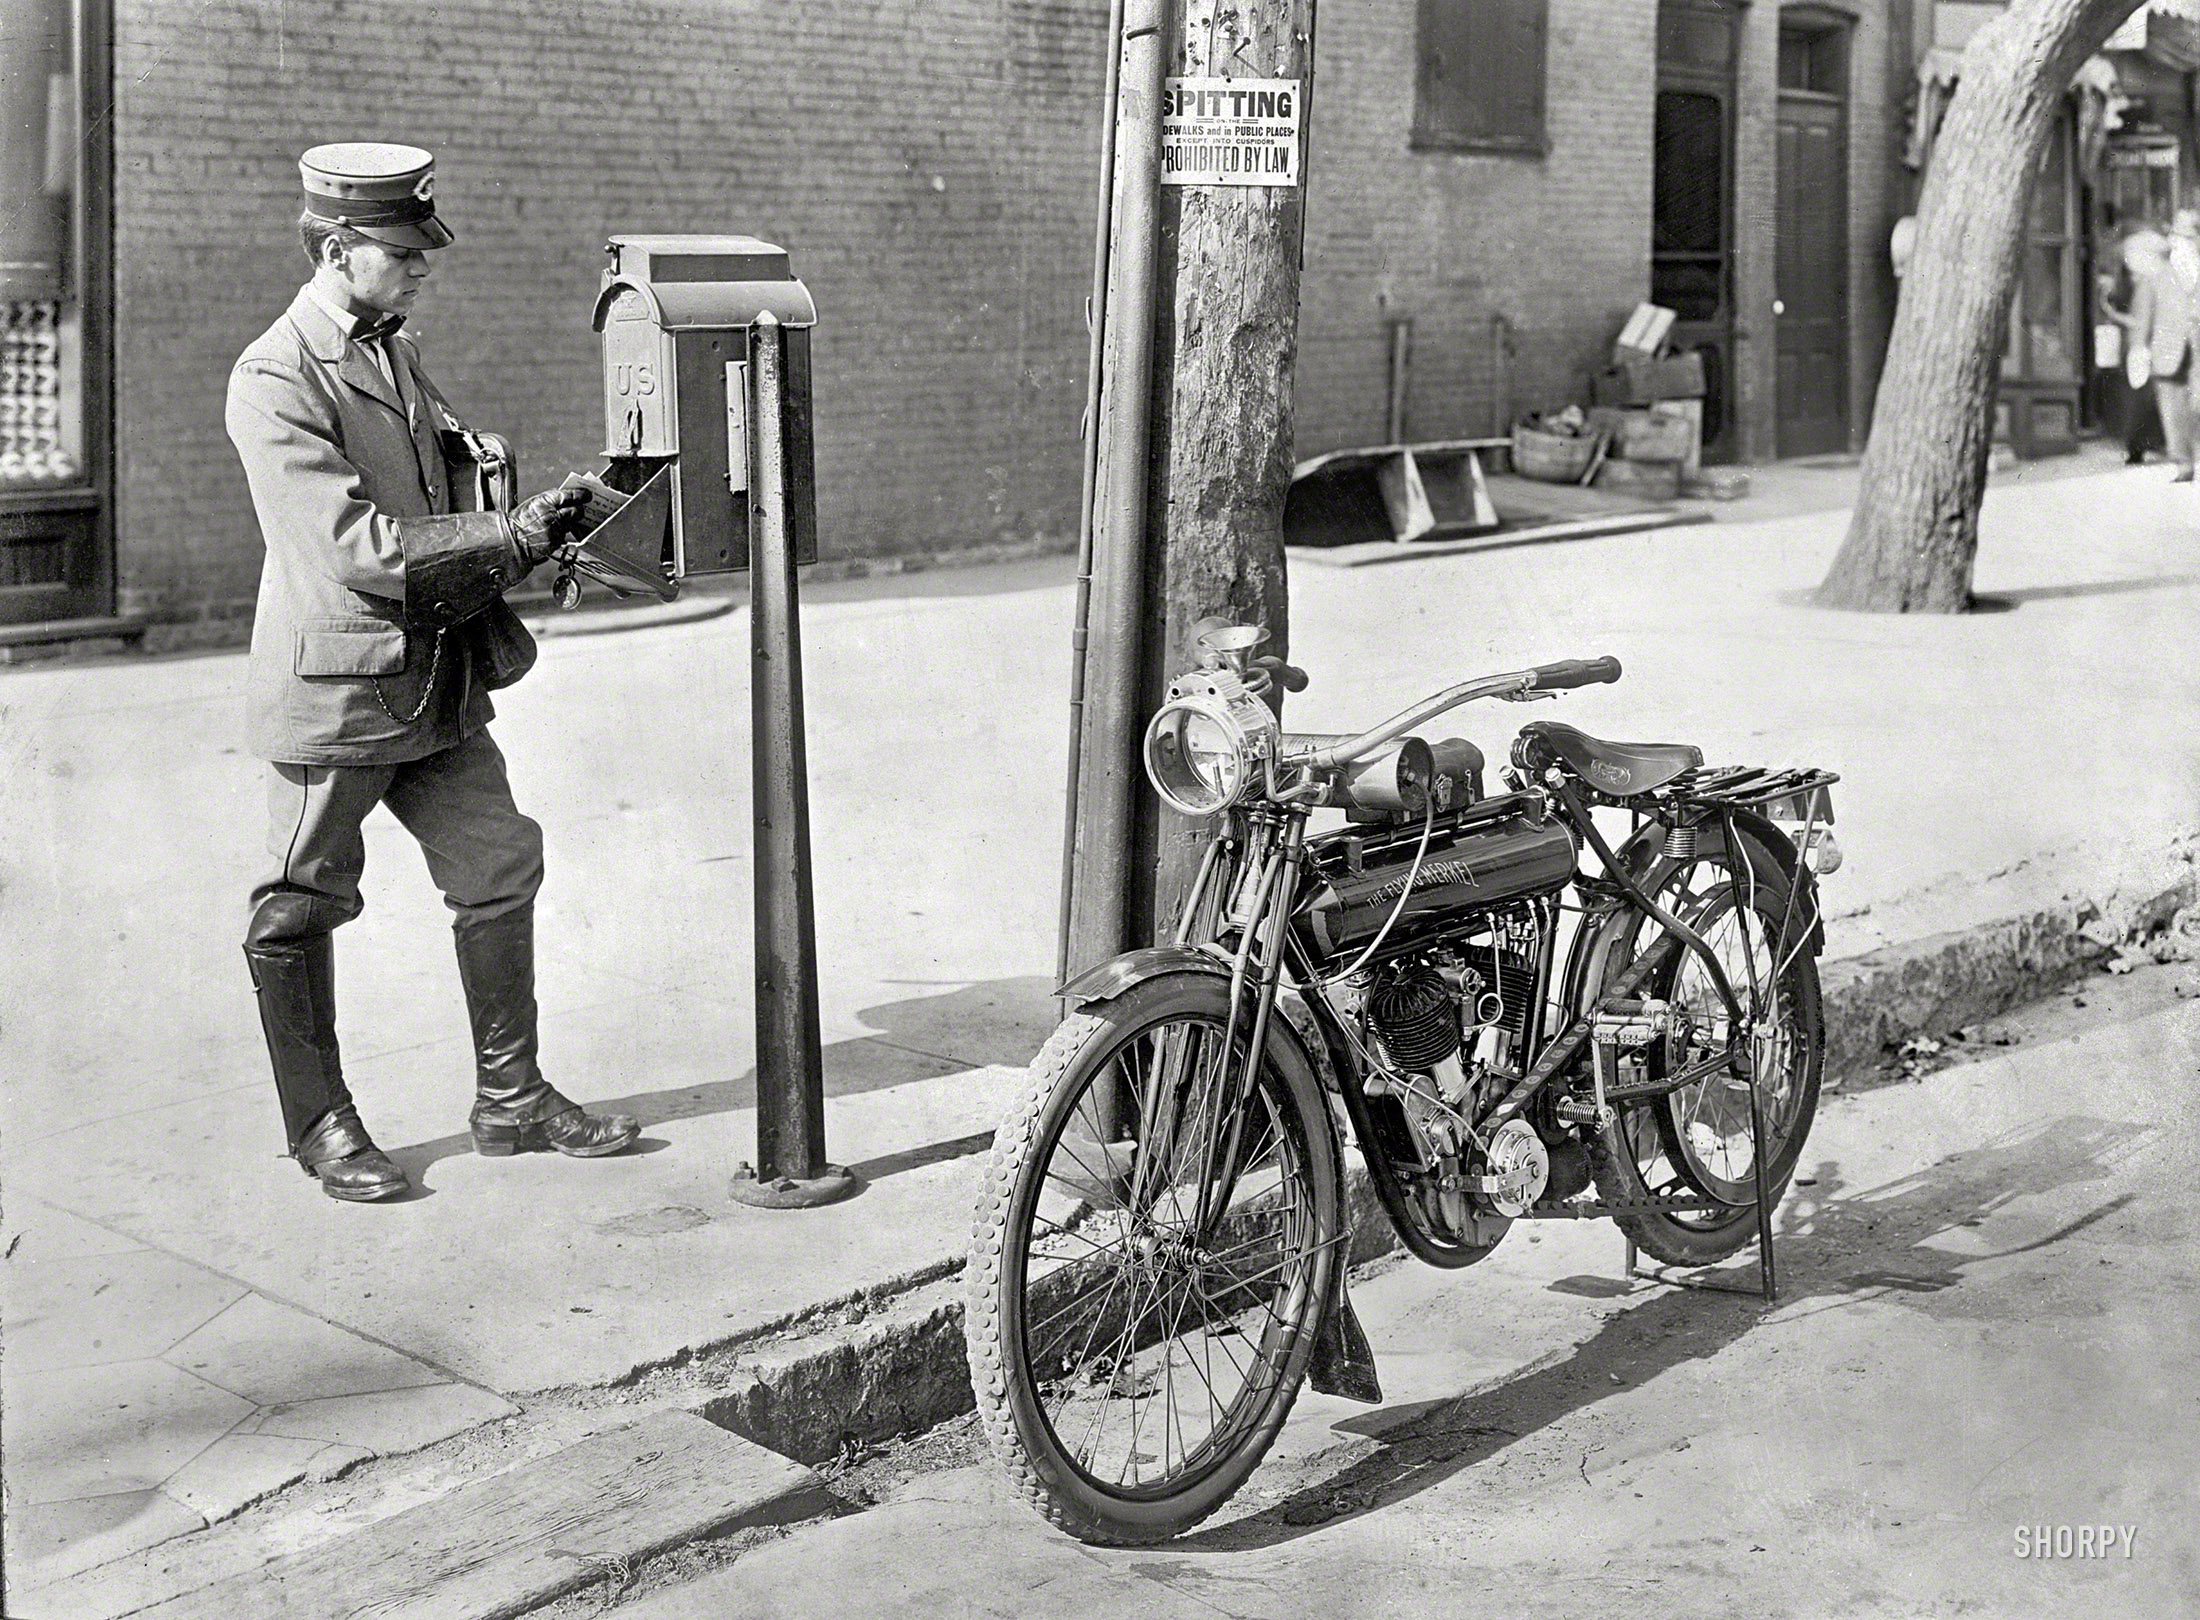 Circa 1915, location unknown. "Mailman & motorcycle." And not just any motorbike but a "Flying Merkel," with what looks like an acetylene-gas headlamp. Oh, and Spitting Prohibited by Law, "Except Into Cuspidors." View full size.